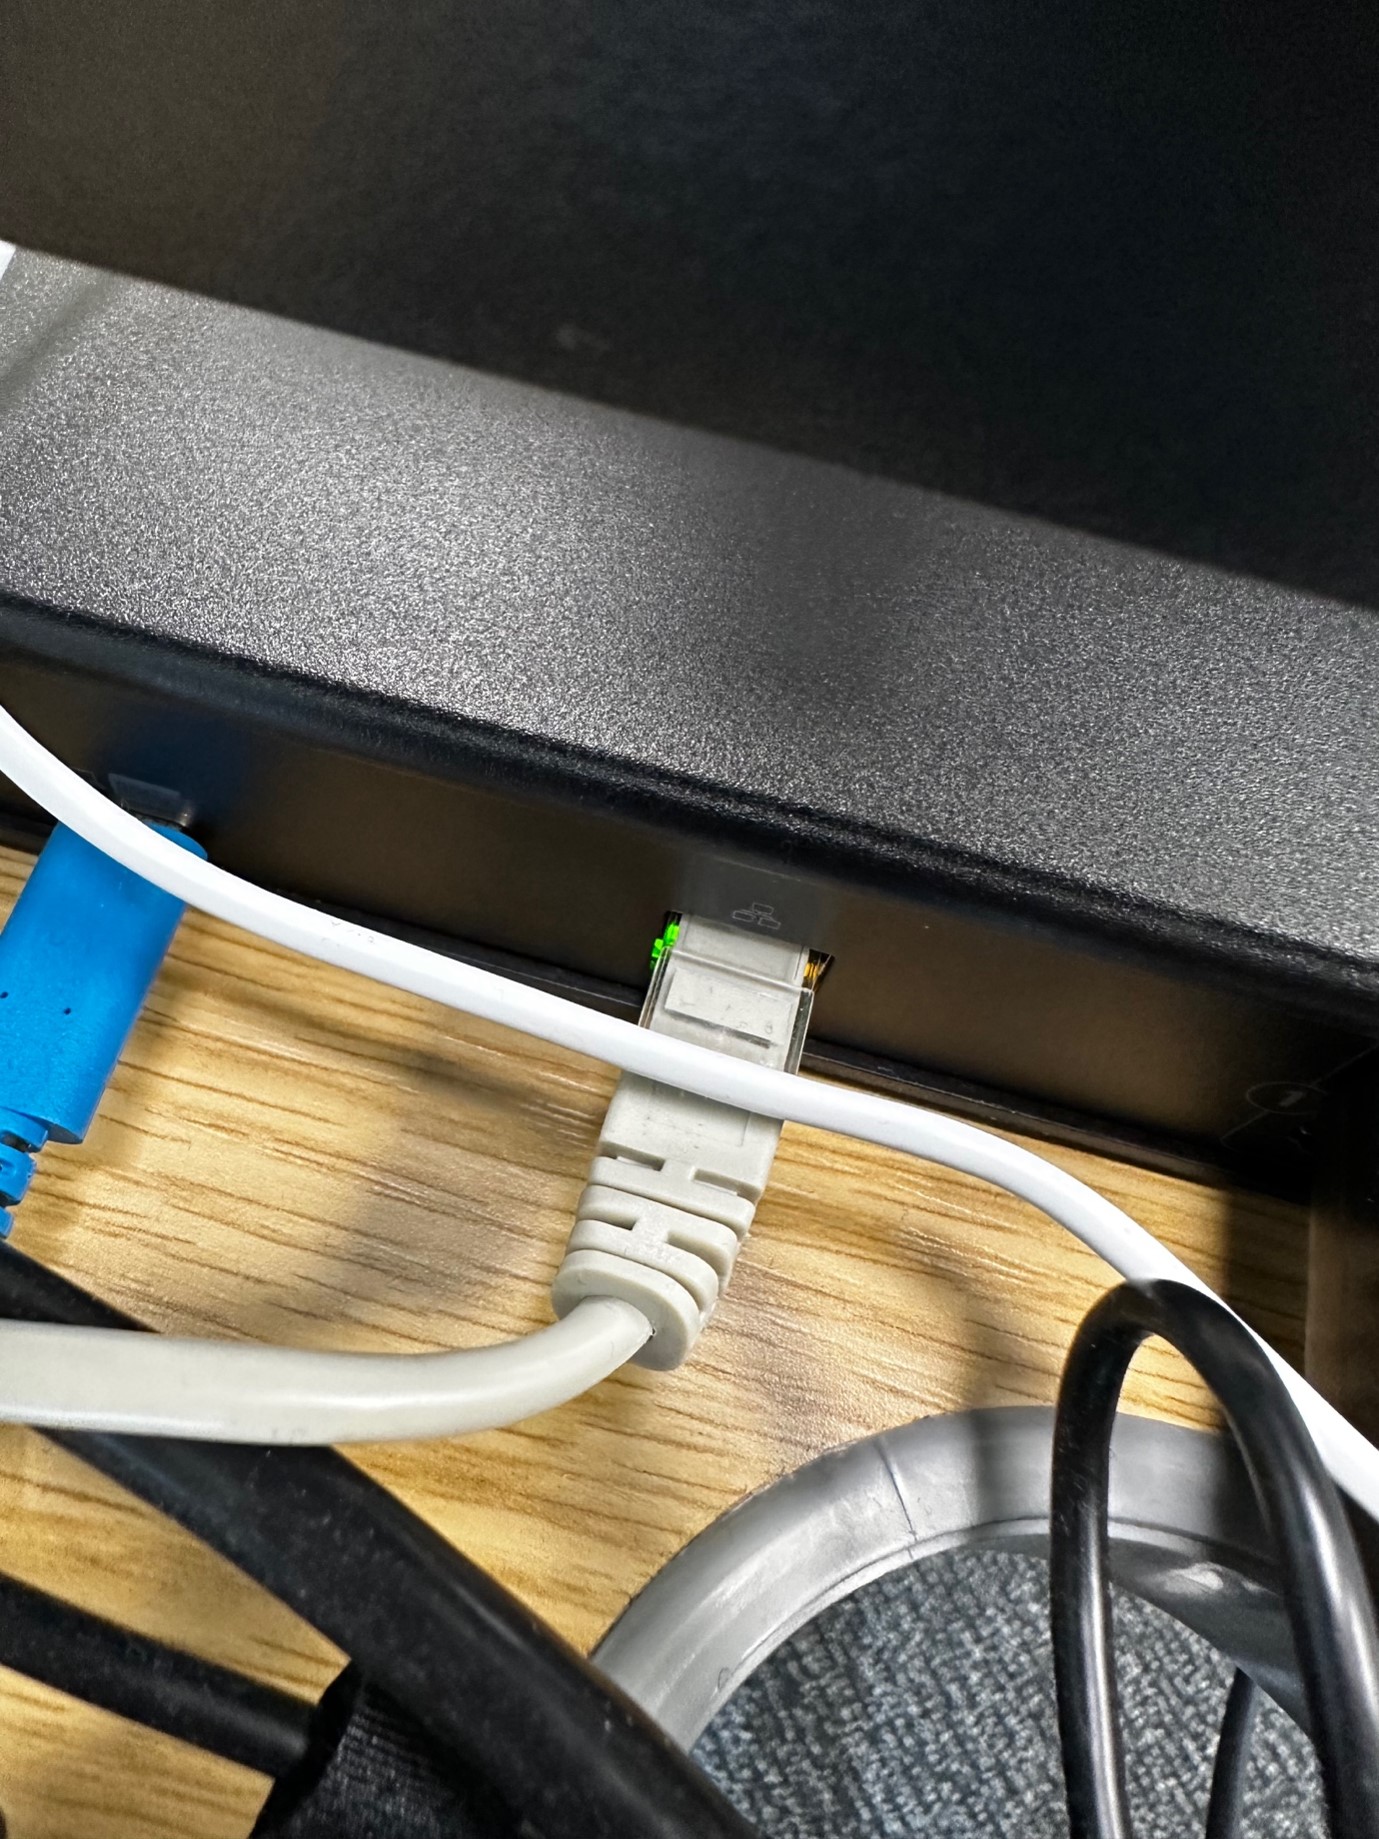 Network cable plugged into docking station